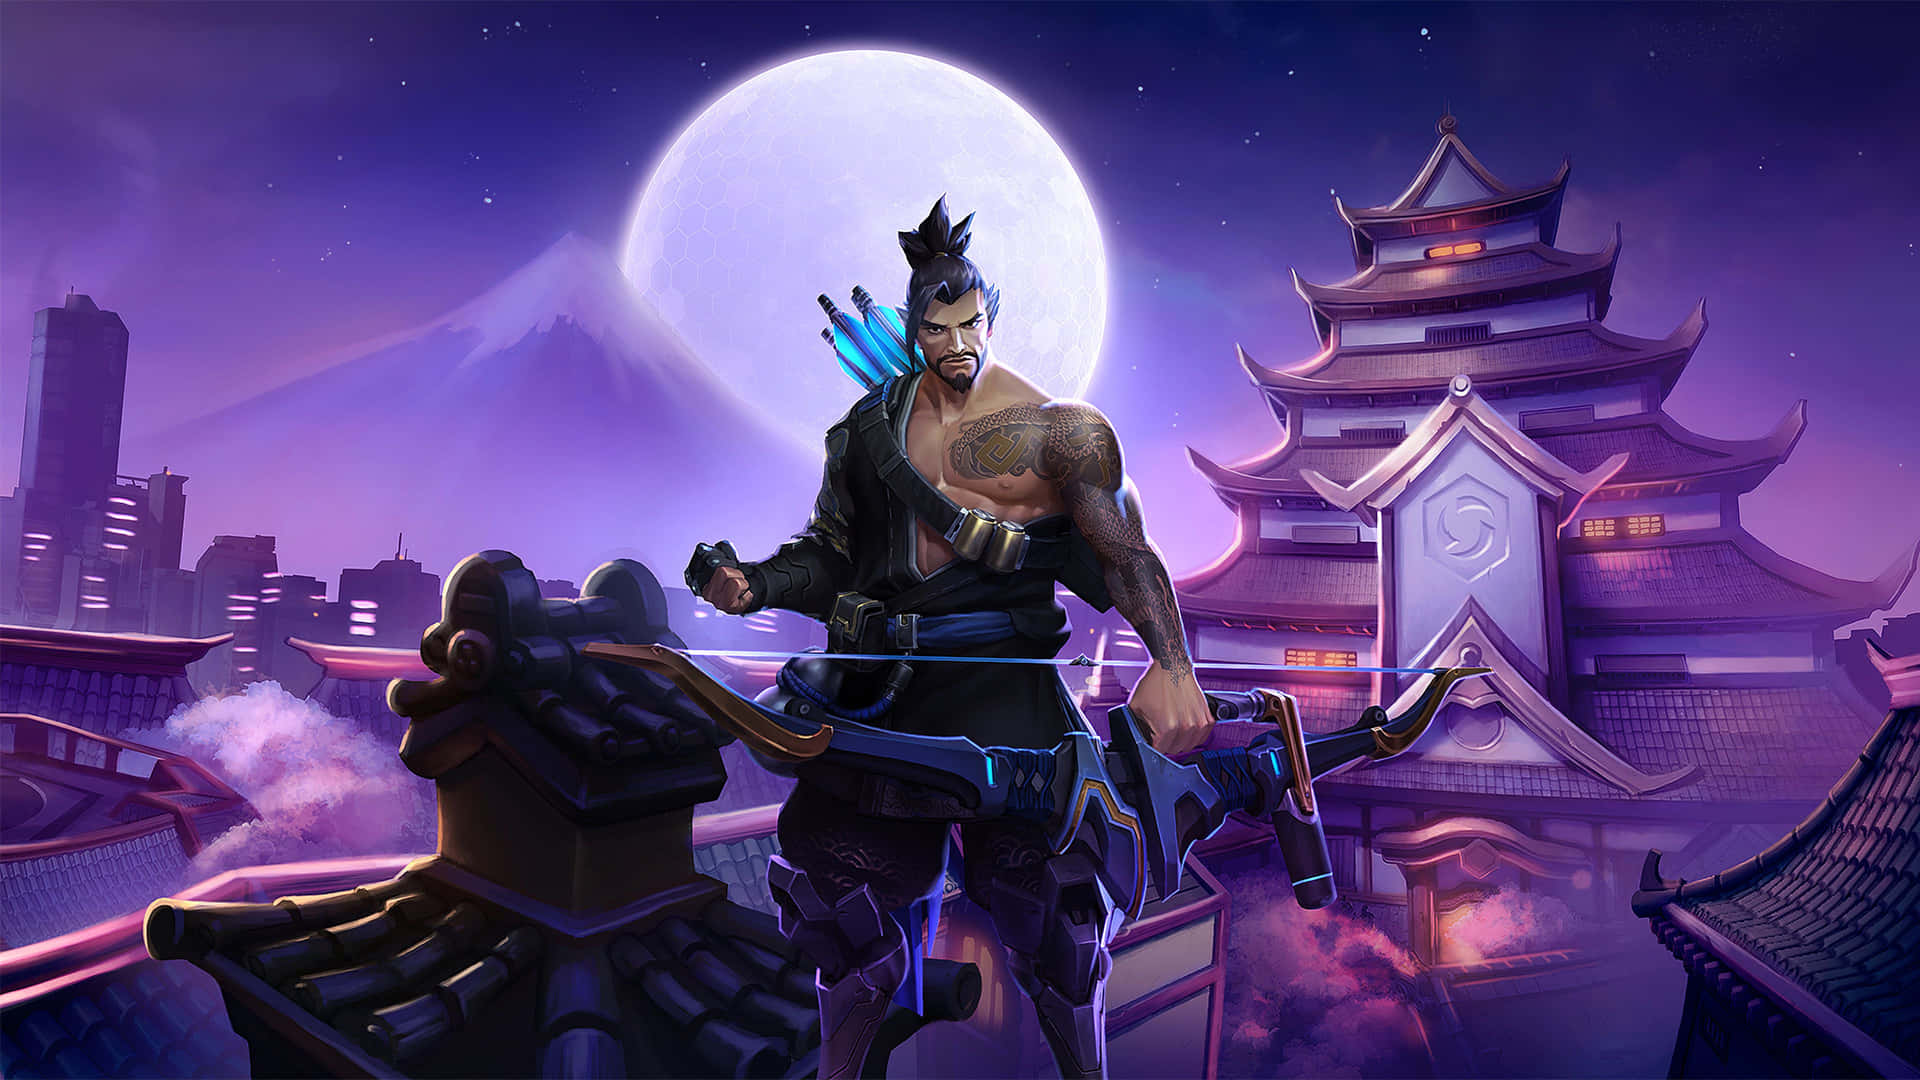 Hanzo from Overwatch extending his bow and arrow, set against an intense, action-filled background Wallpaper